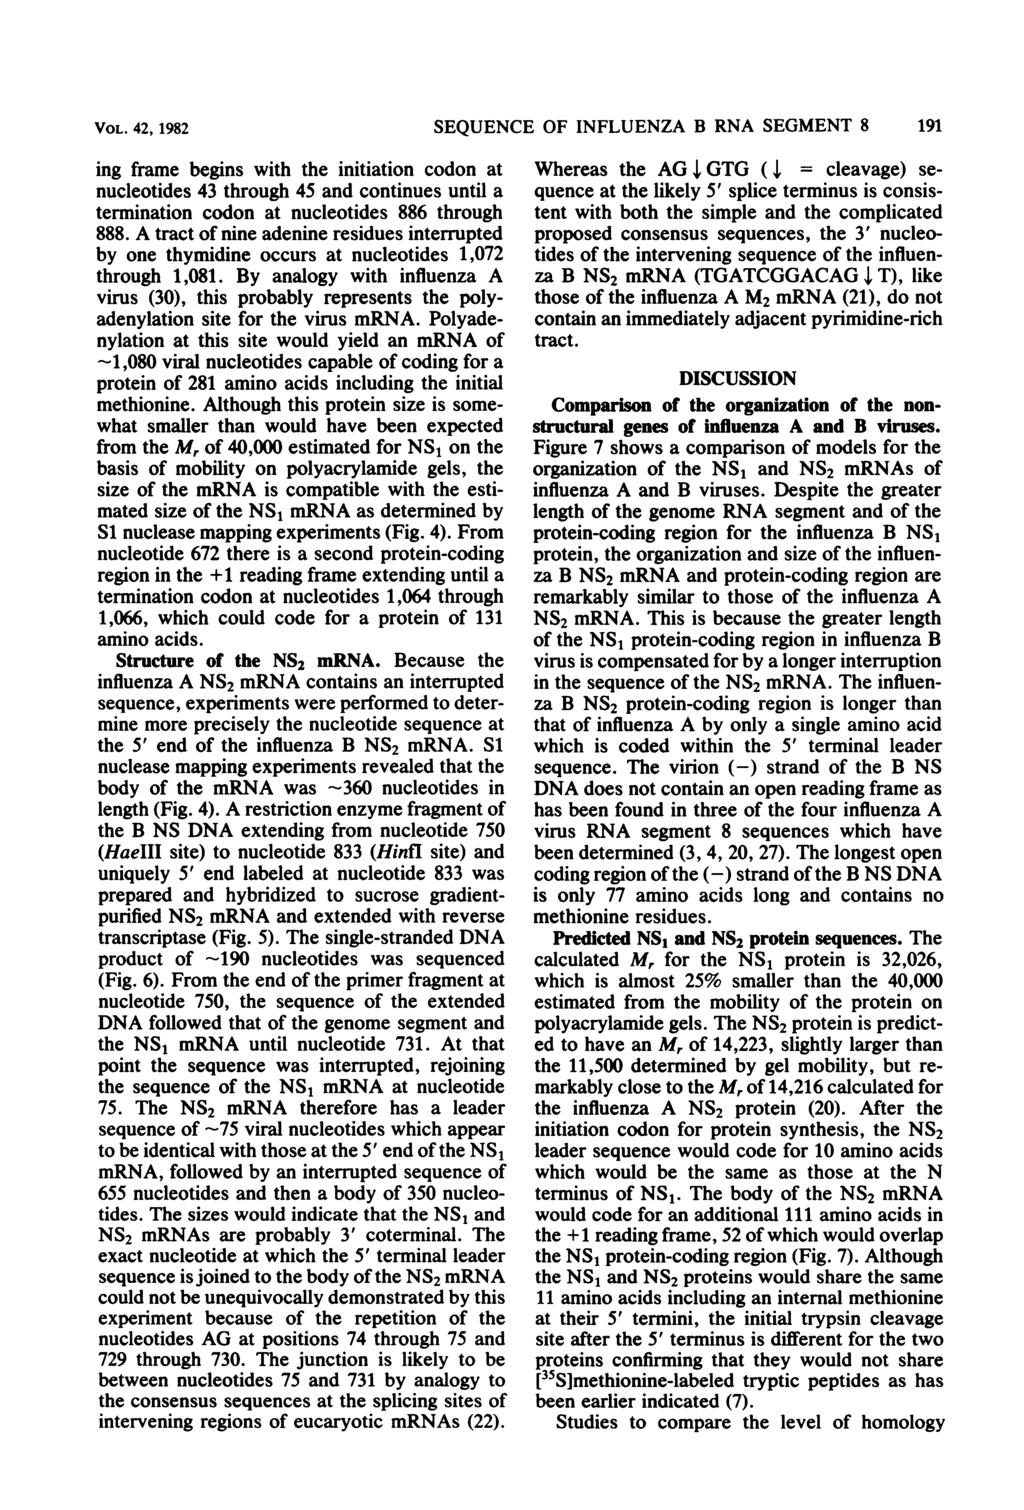 VOL. 42, 1982 SEQUENCE OF INFLUENZA B RNA SEGMENT 8 191 ing frame begins with the initiation codon at nucleotides 43 through 45 and continues until a termination codon at nucleotides 886 through 888.